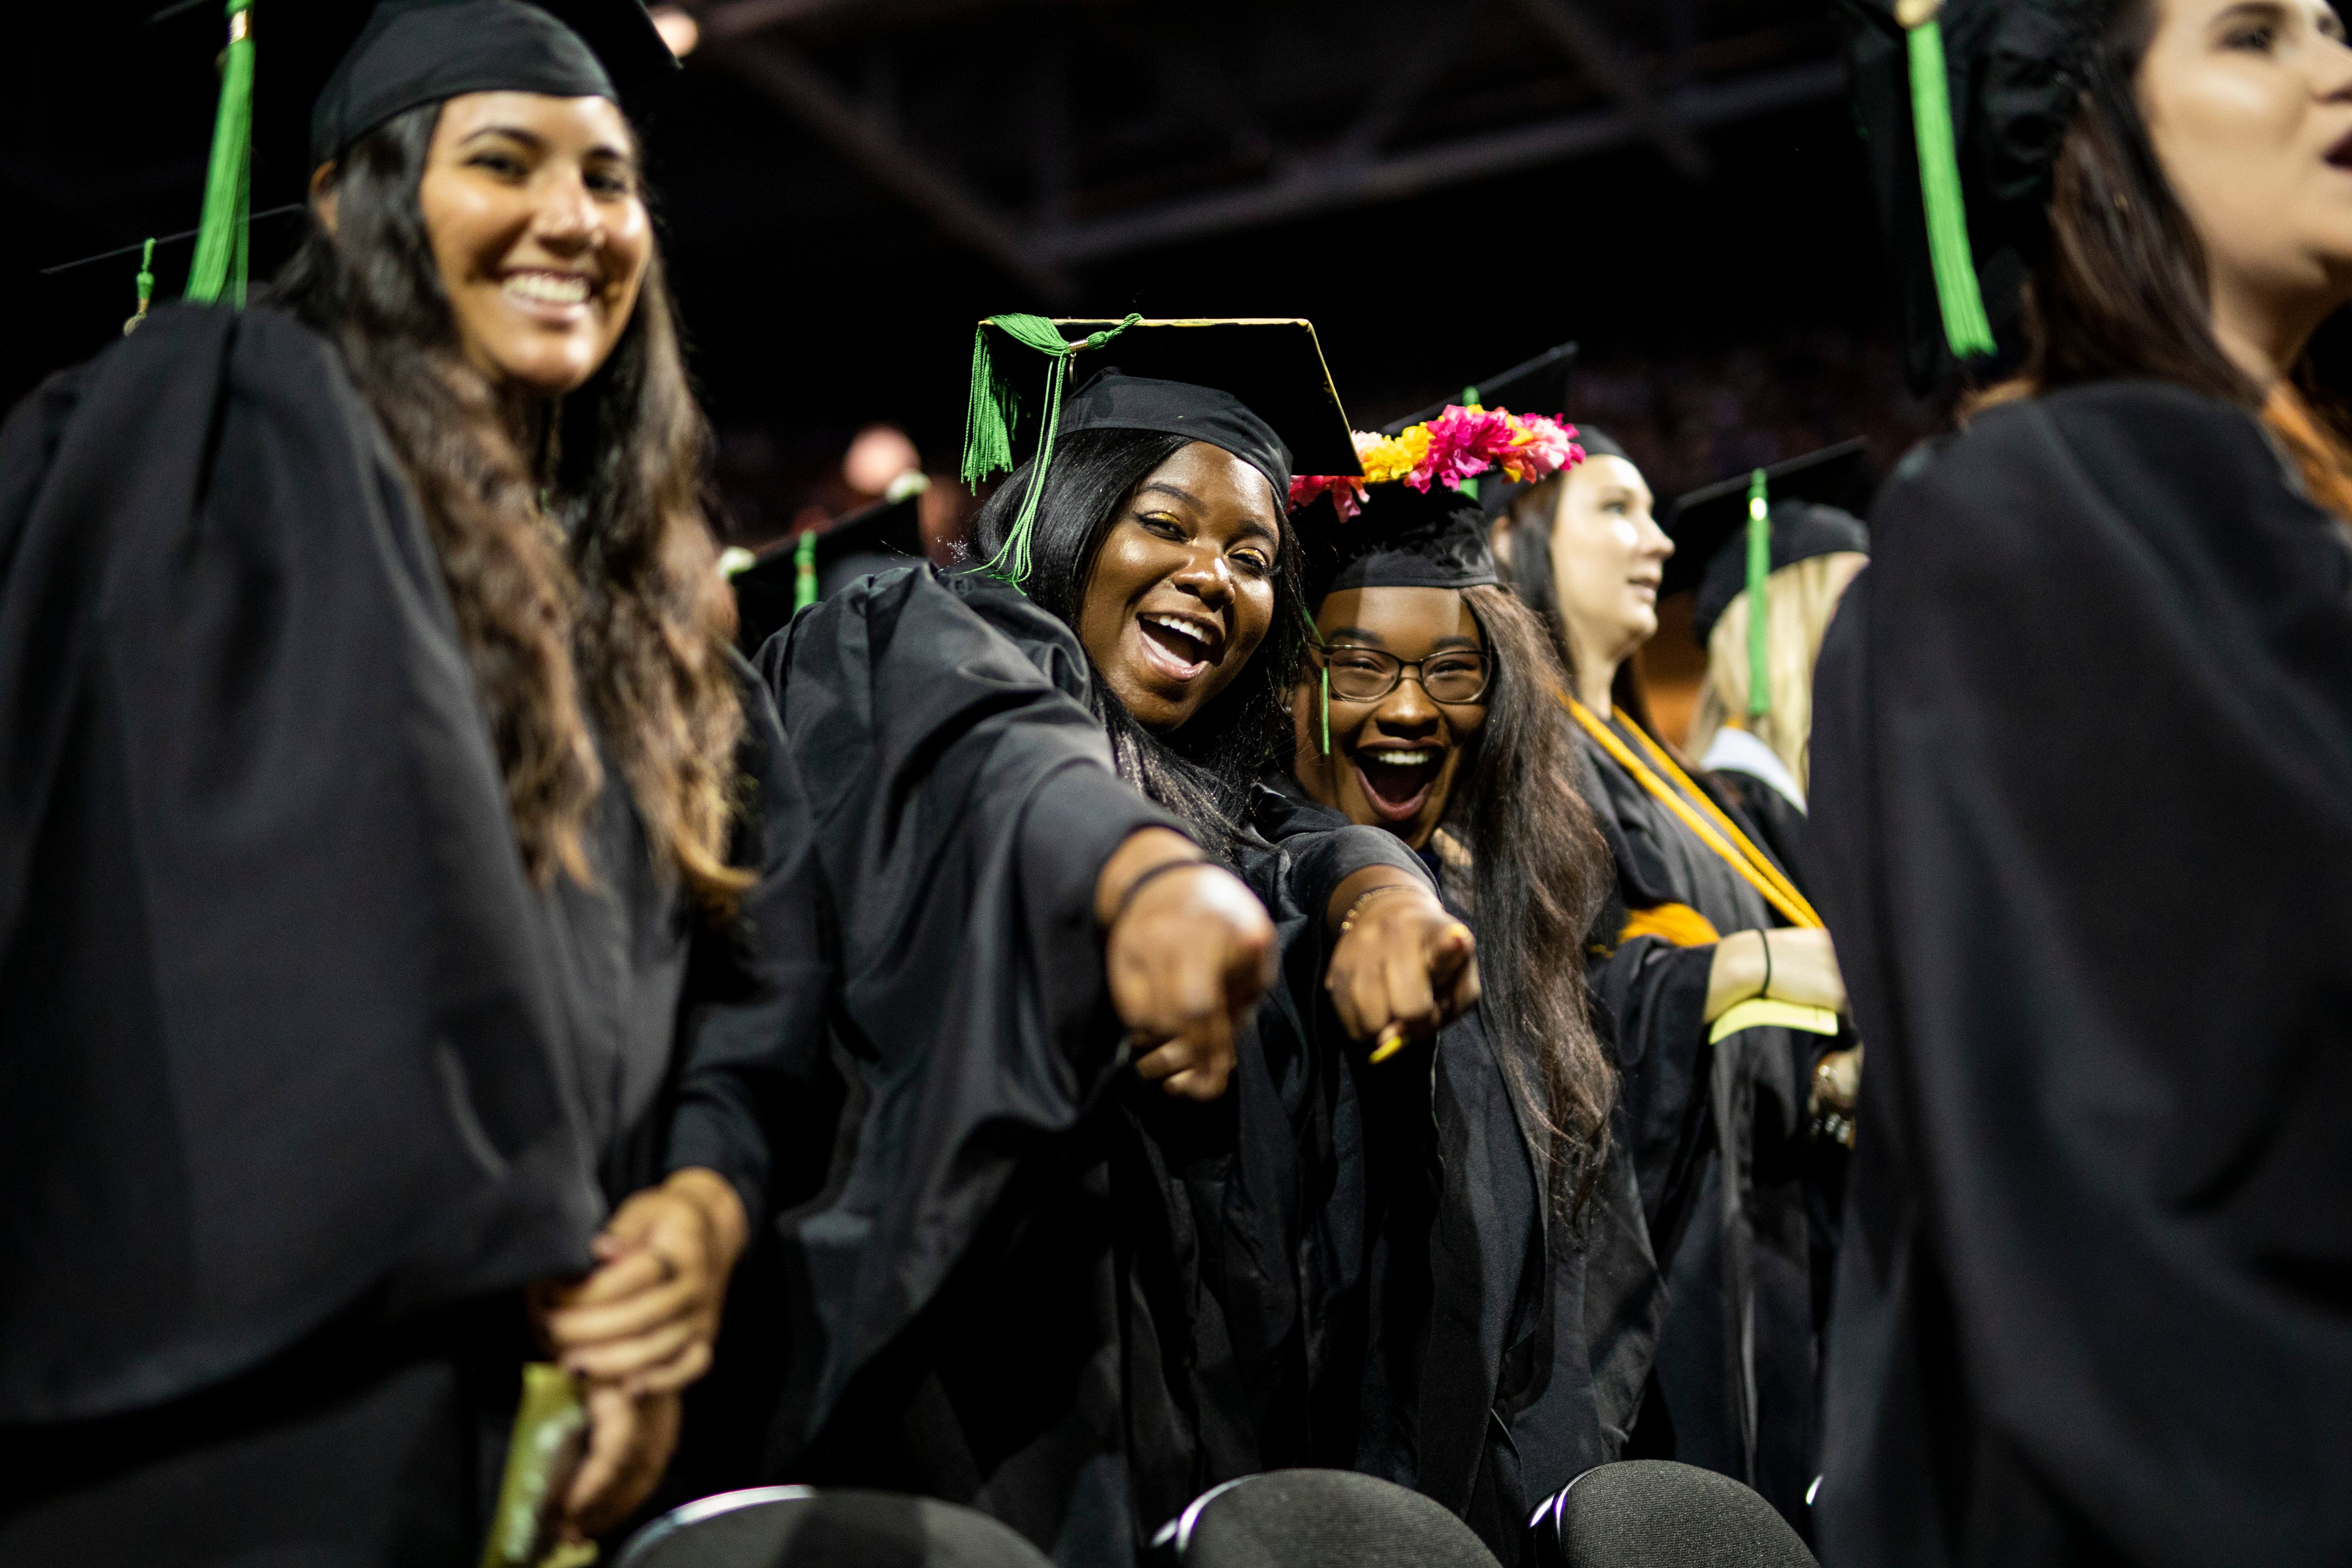 Two students wearing caps and gowns smile and point at the camera during a graduation ceremony.